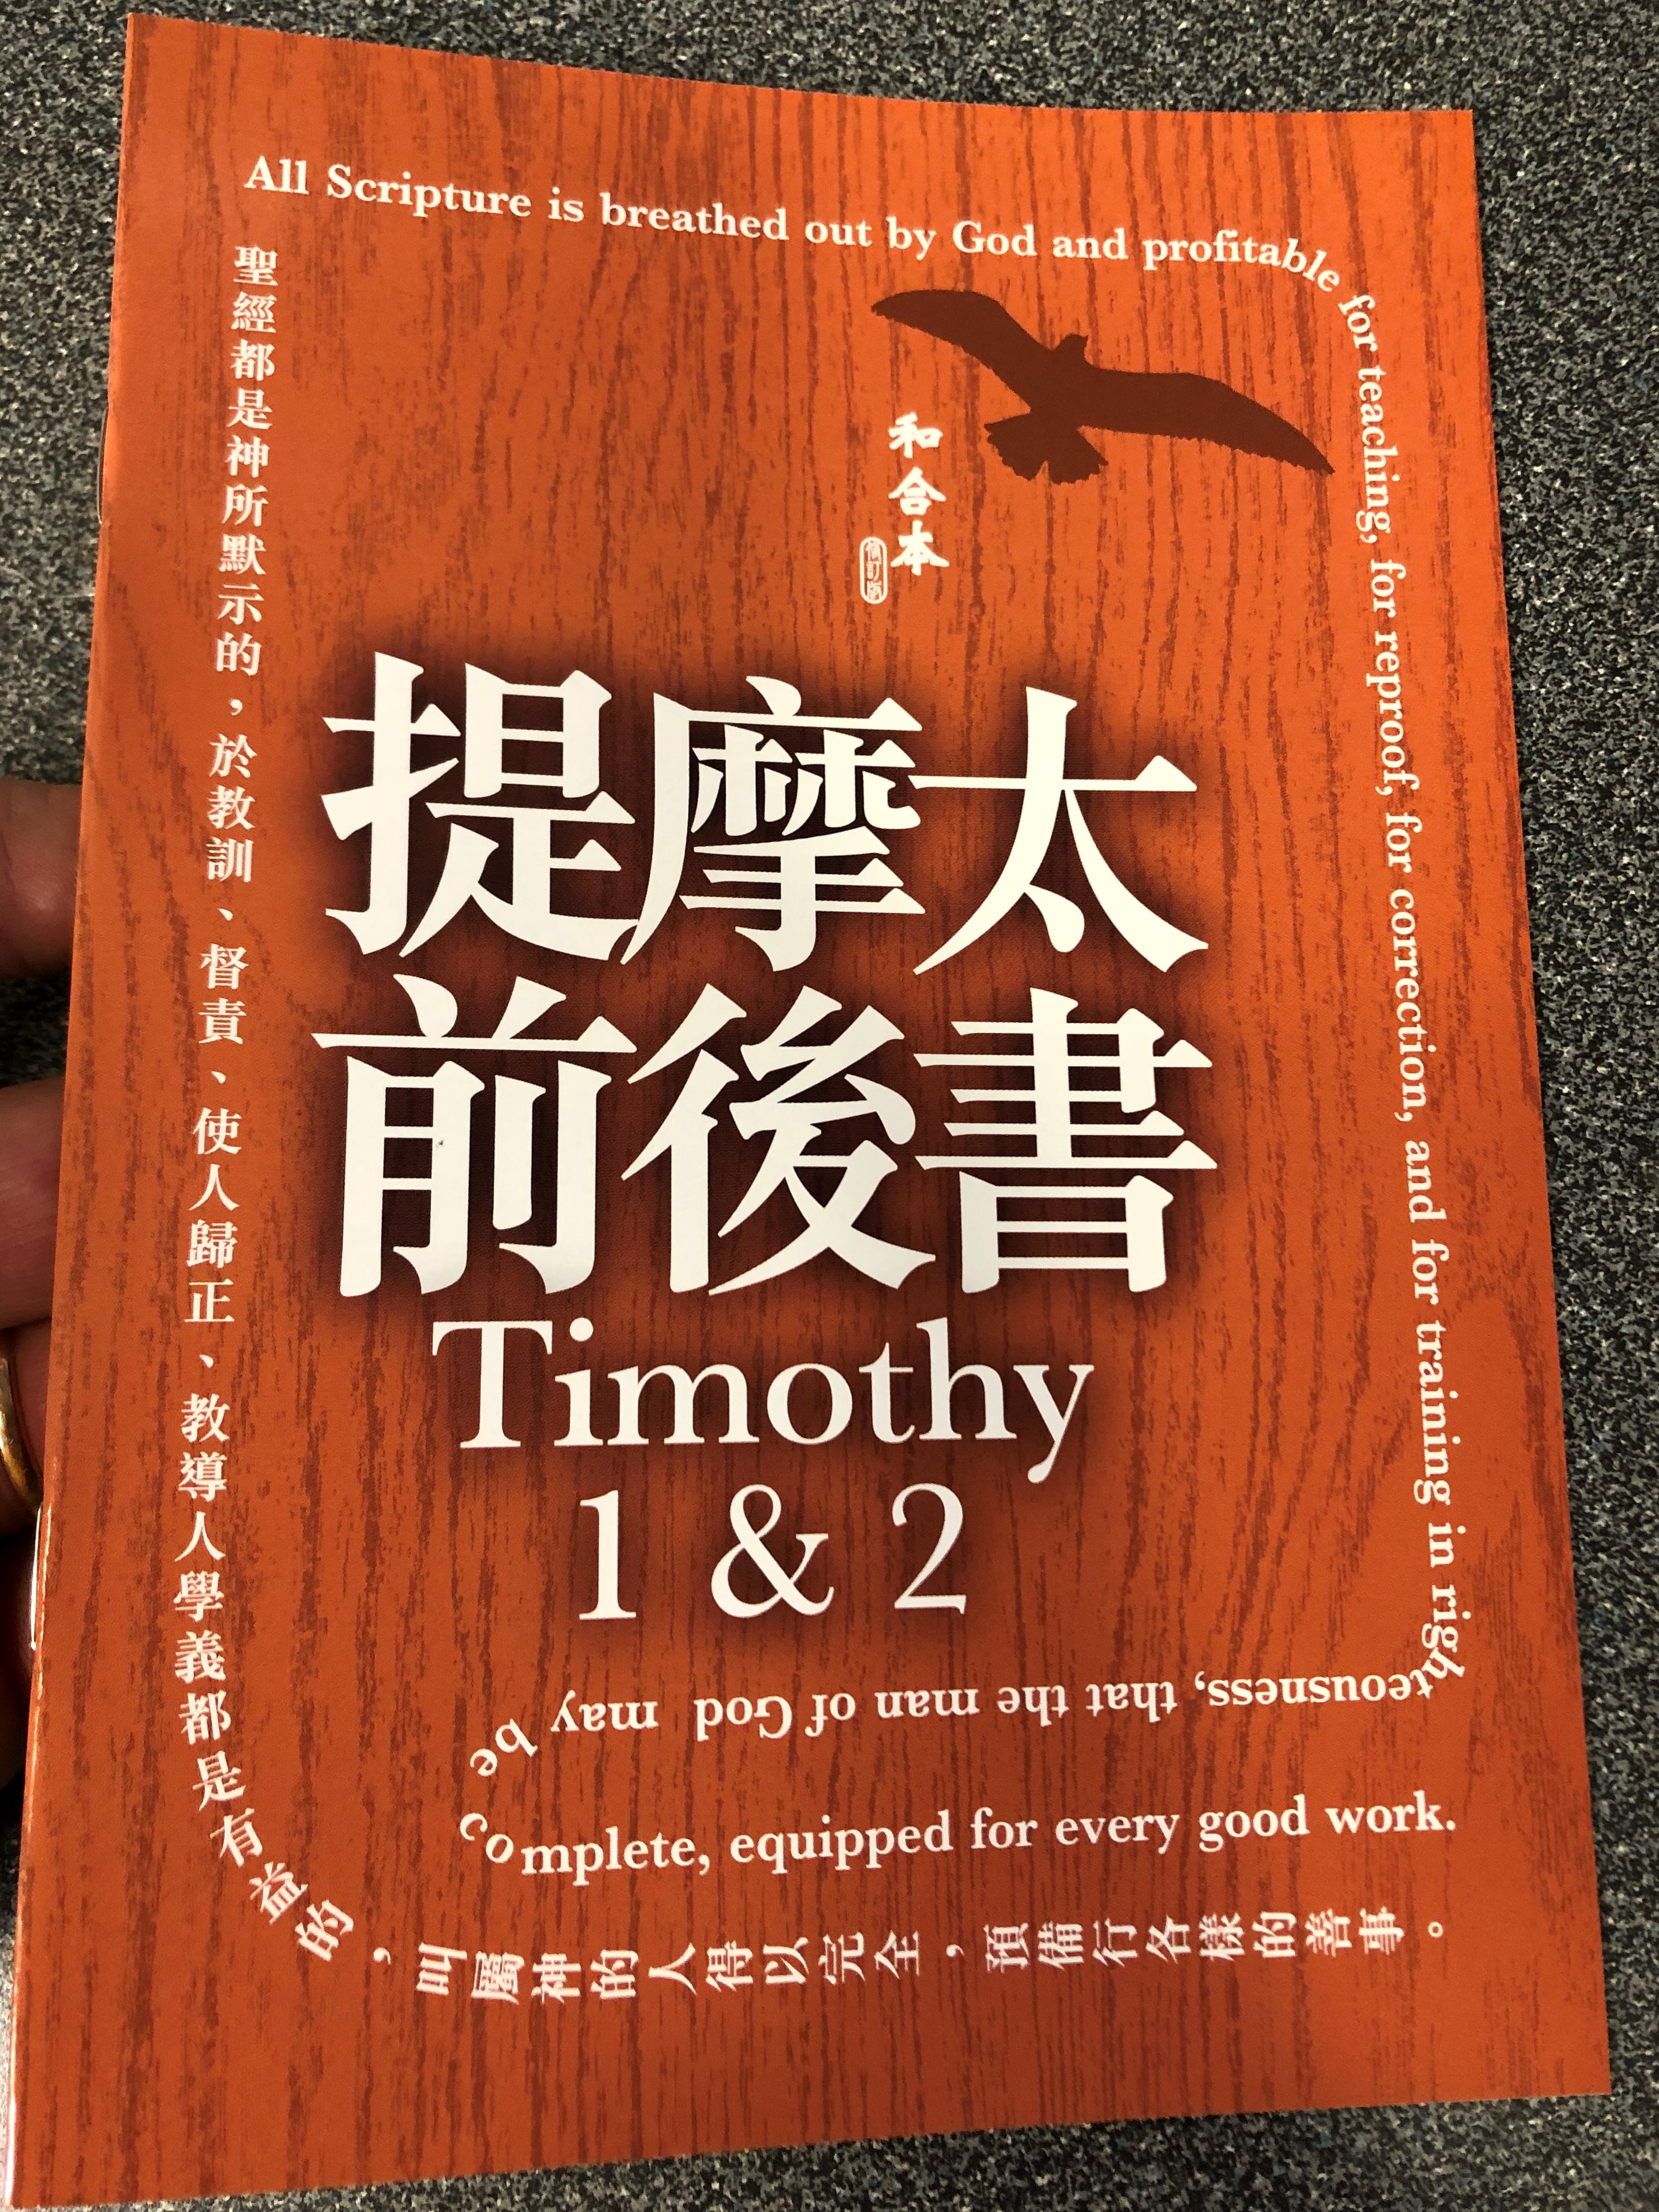 paul-s-1st-and-2nd-letter-to-timothy-in-chinese-language-super-large-print-edition-revised-chinese-union-version-cu2010-hkbs-1-.jpg